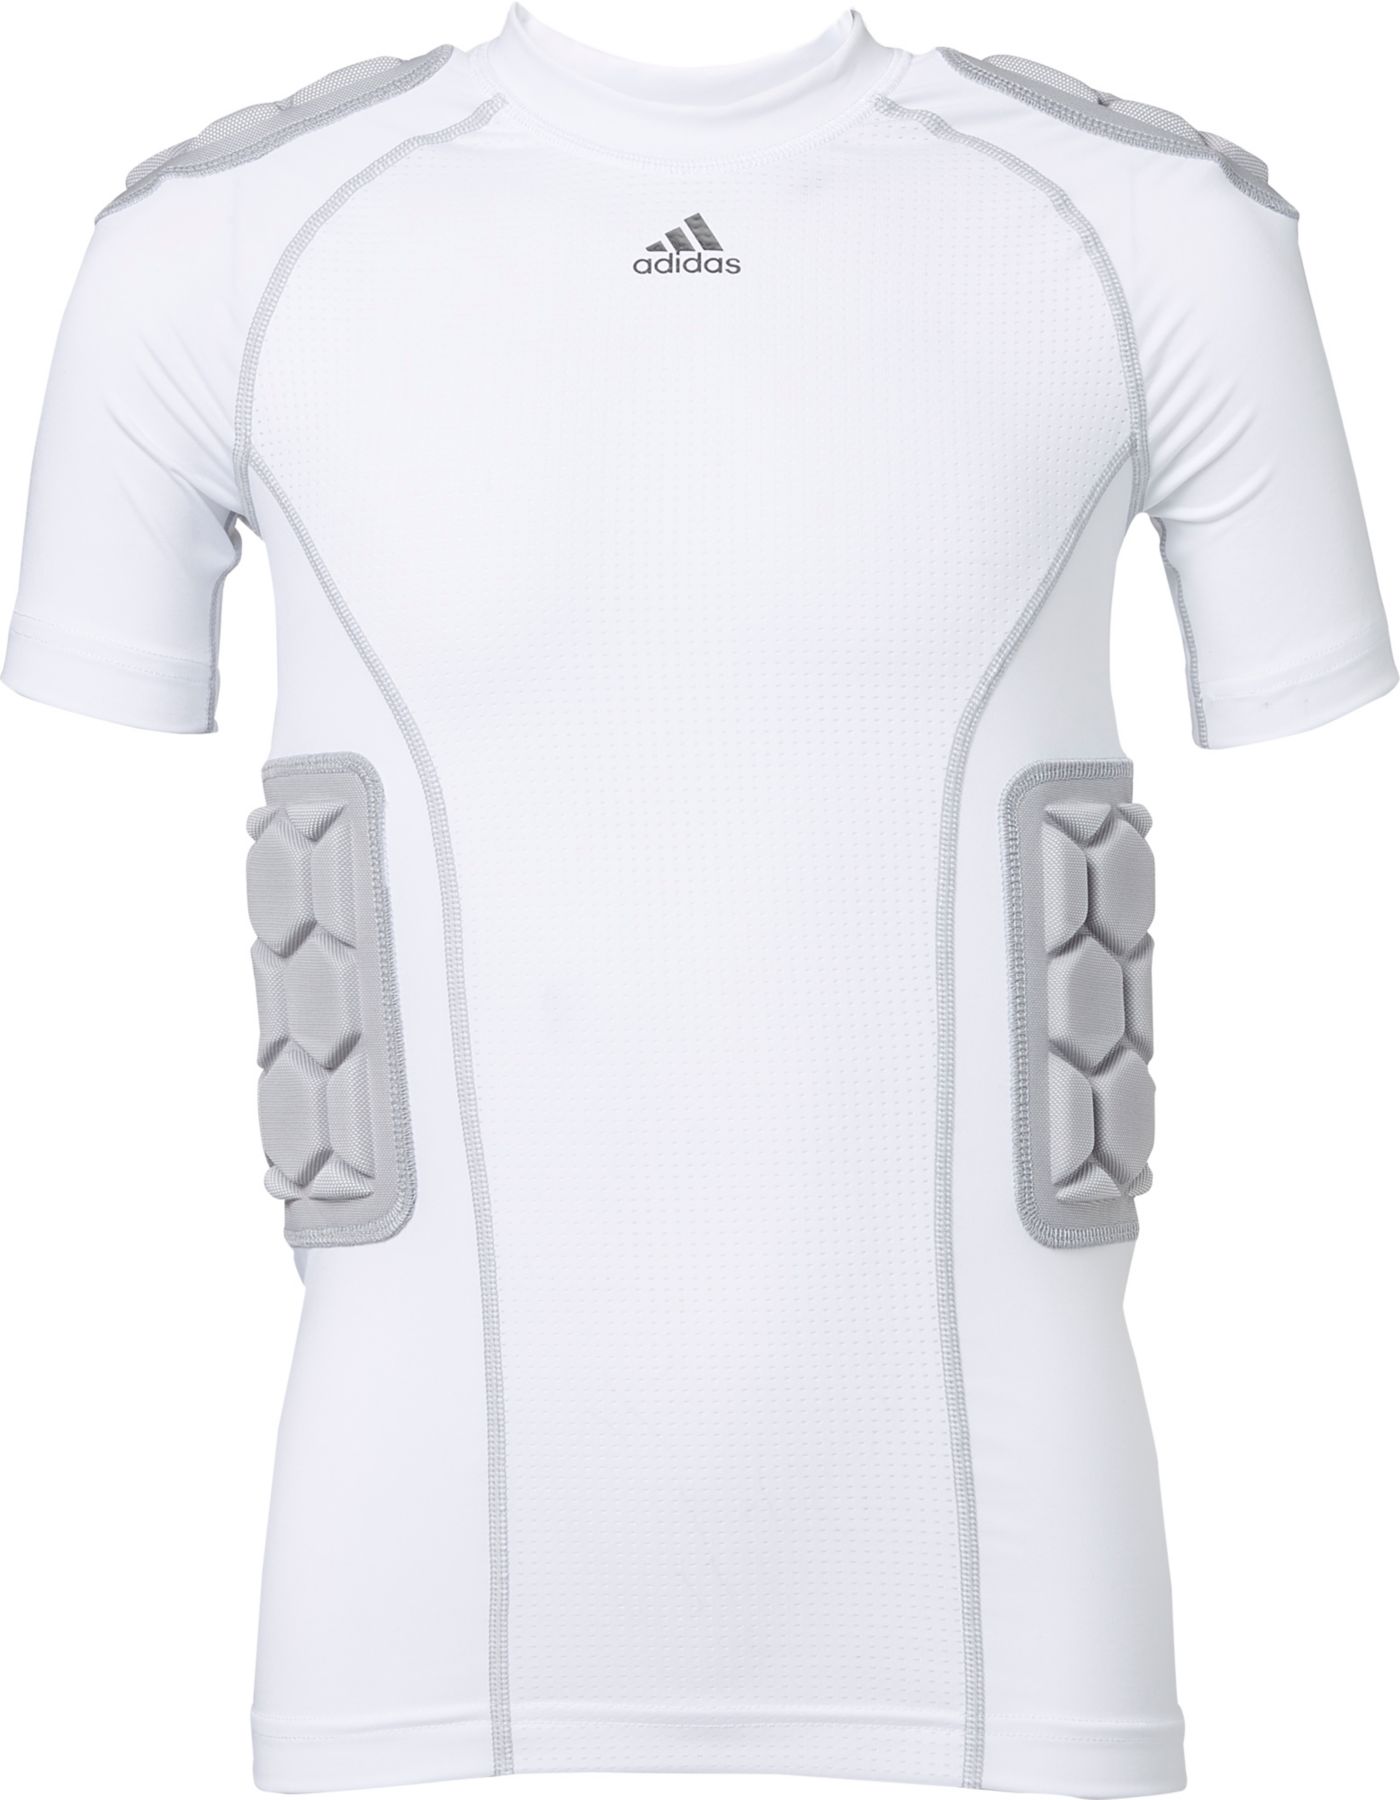 adidas Youth Techfit Padded Football Shirt | DICK'S Sporting Goods